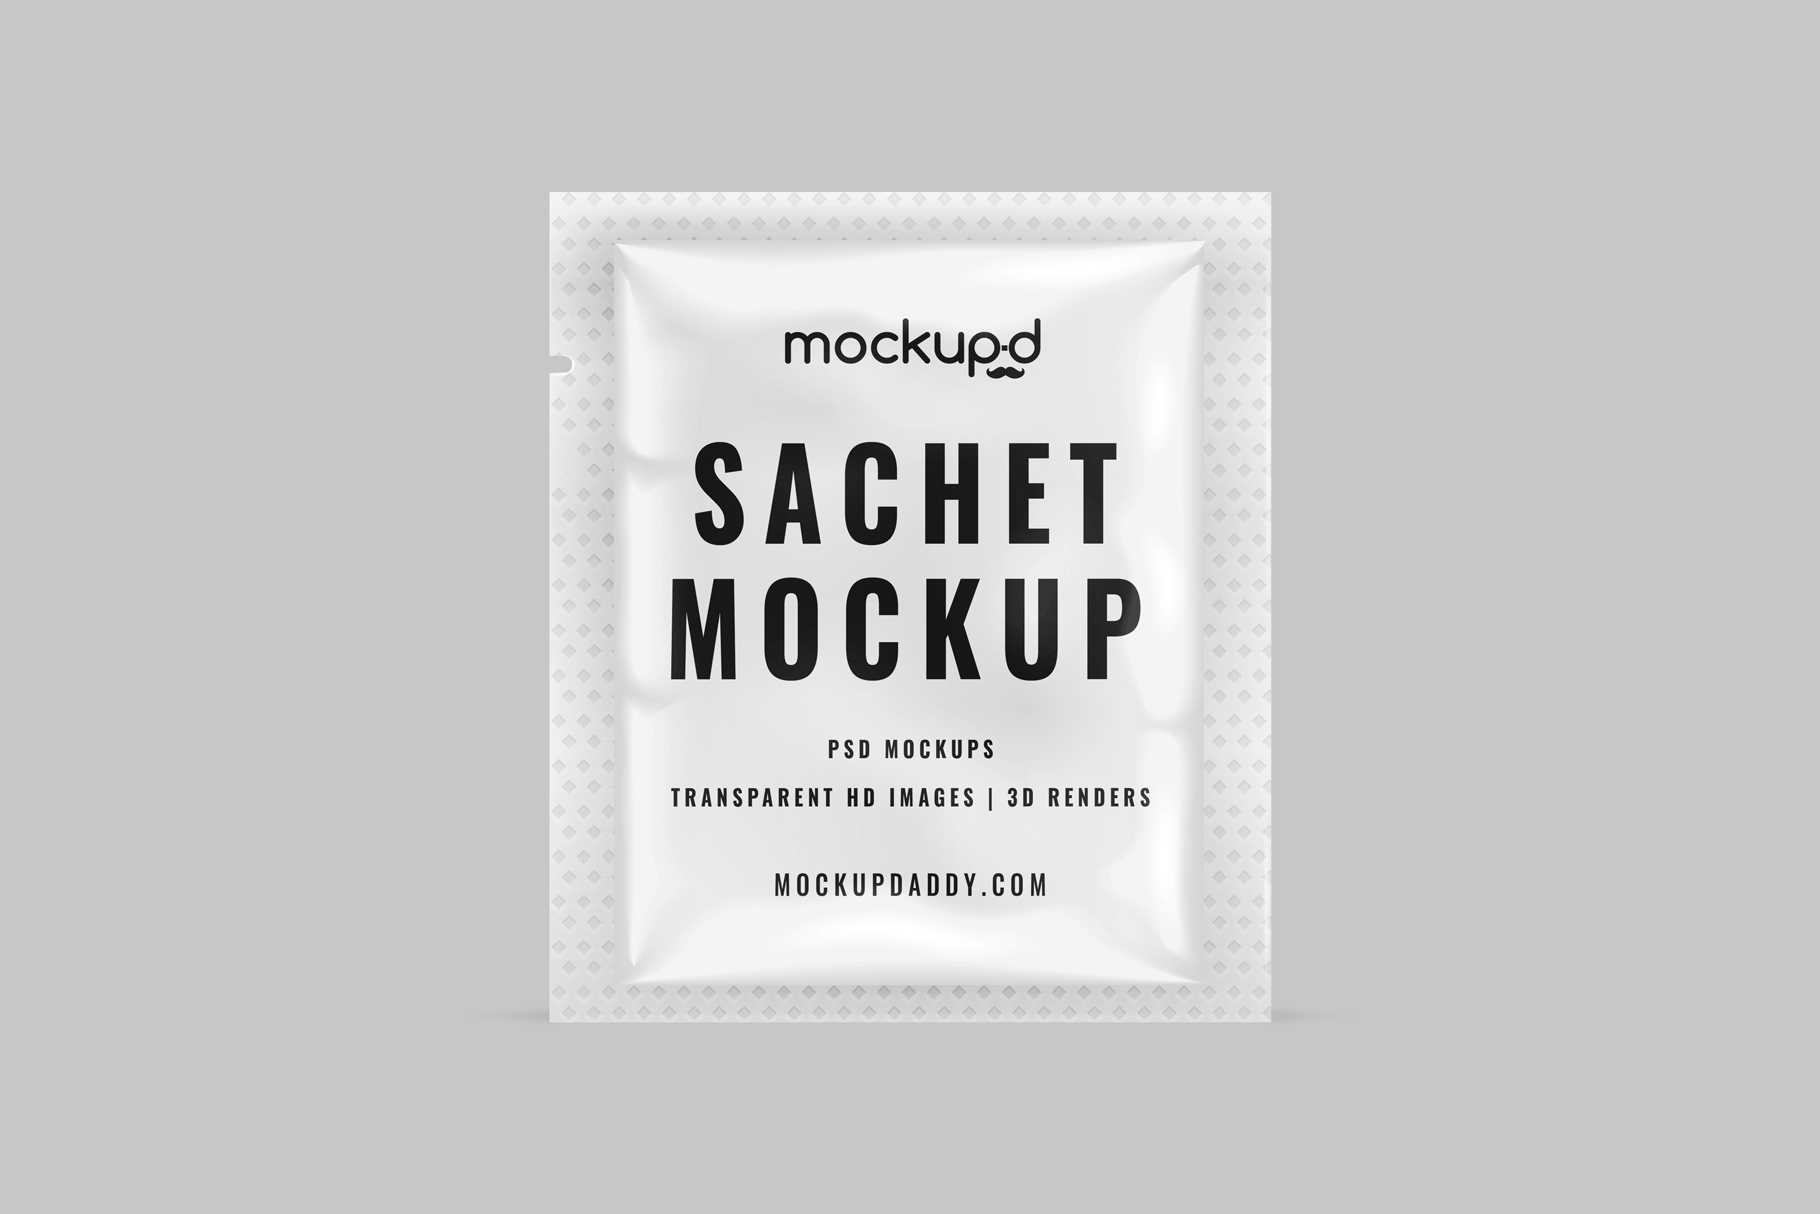 Small and wide Sachet Psd Mockup in white color with black text.